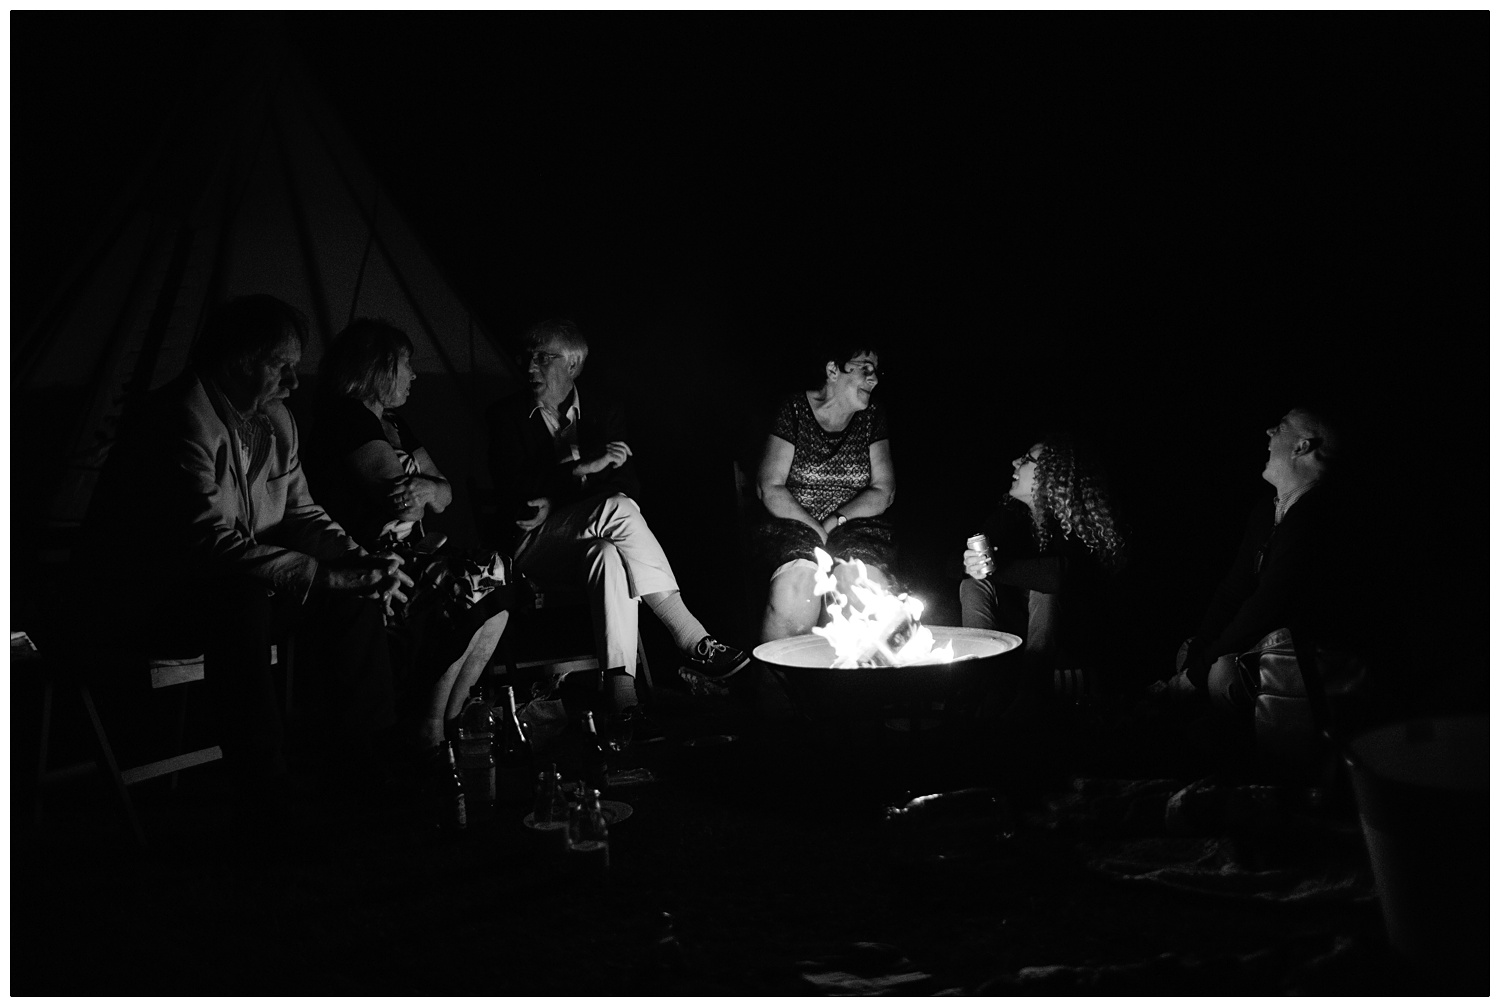 Family and friends at a wedding gather around a fire pit at night.